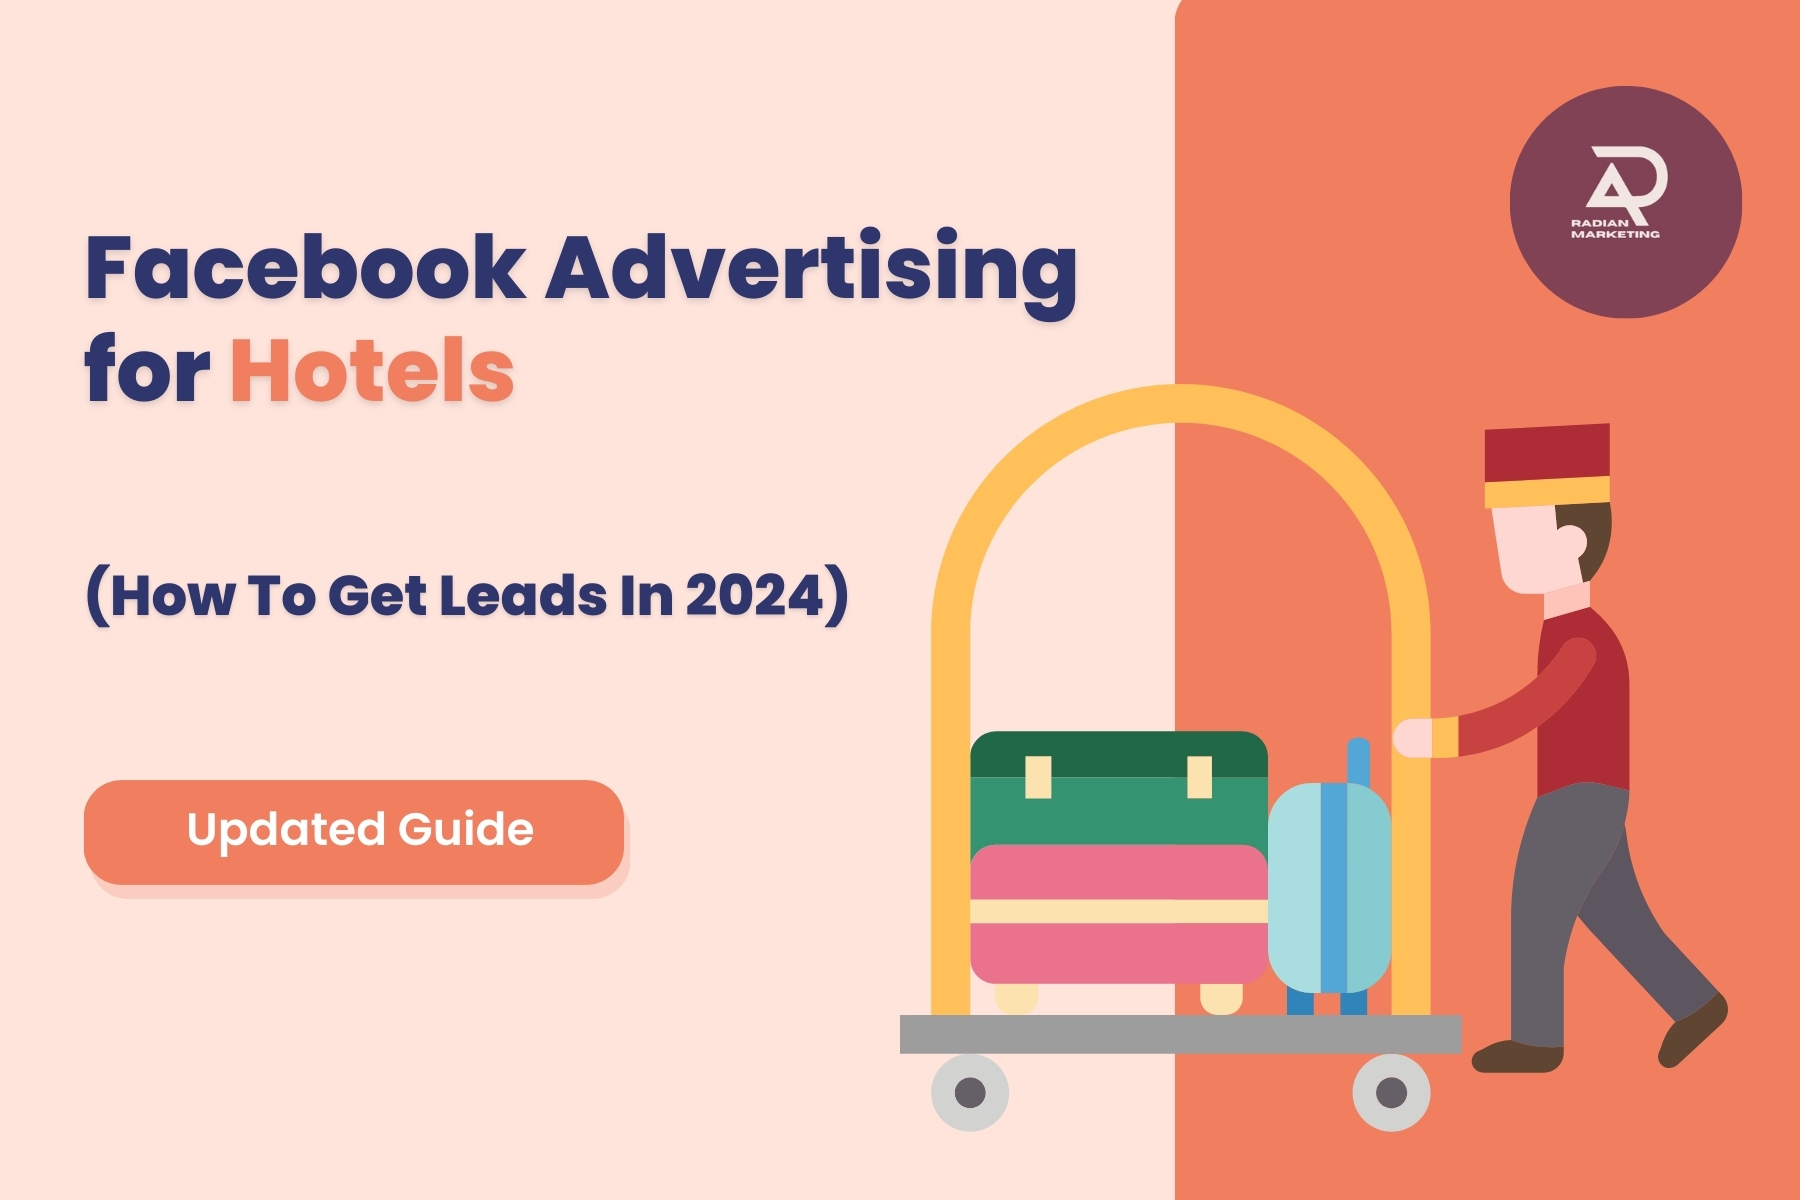 Facebook advertisement for hotels